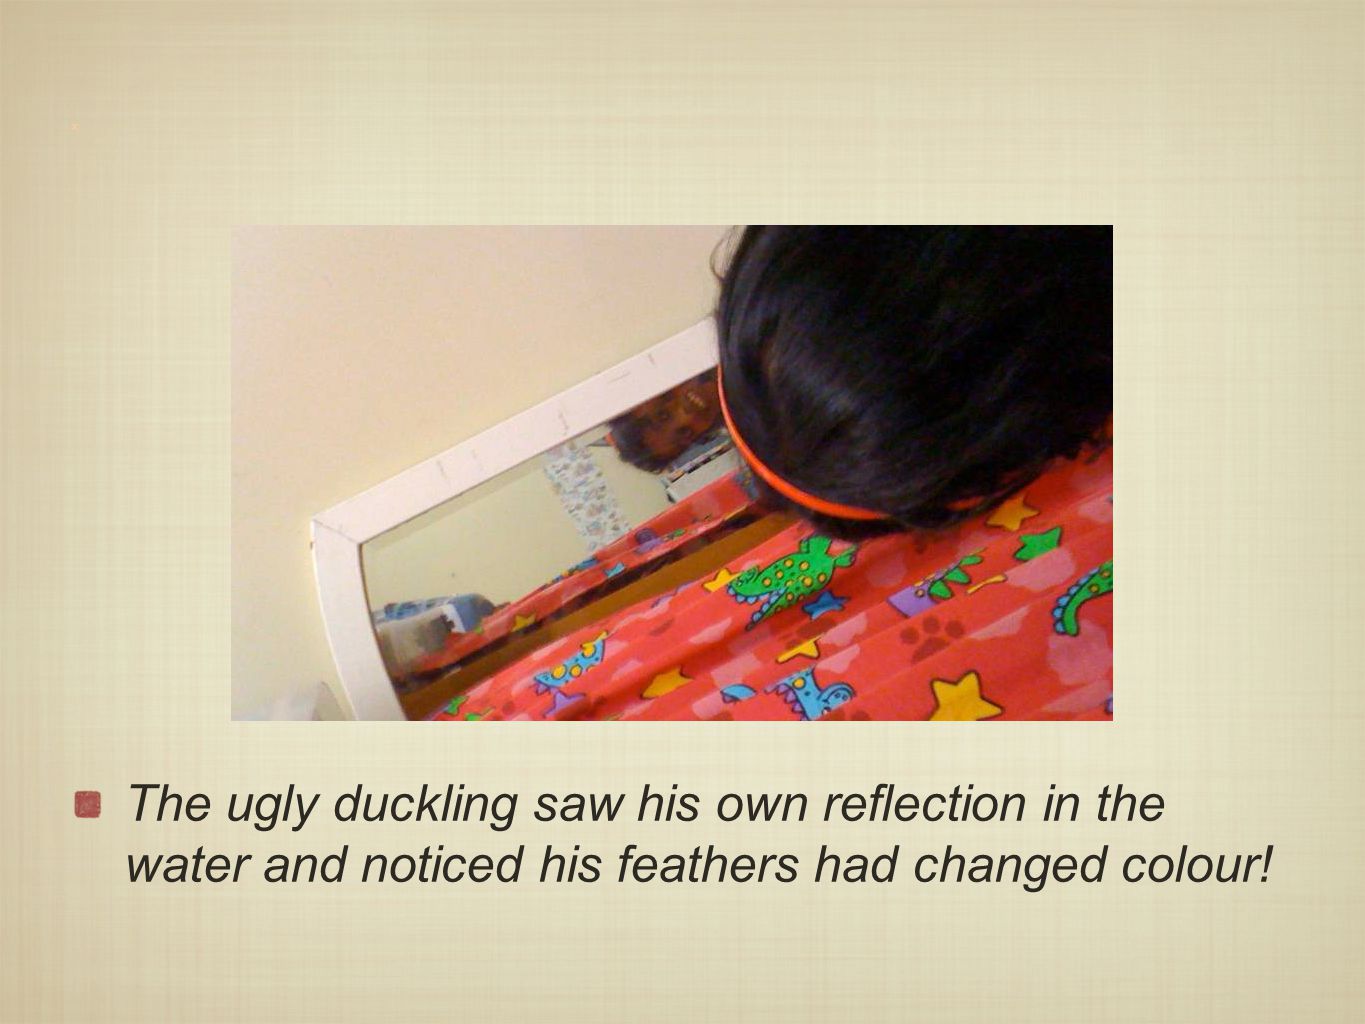 x The ugly duckling saw his own reflection in the water and noticed his feathers had changed colour!